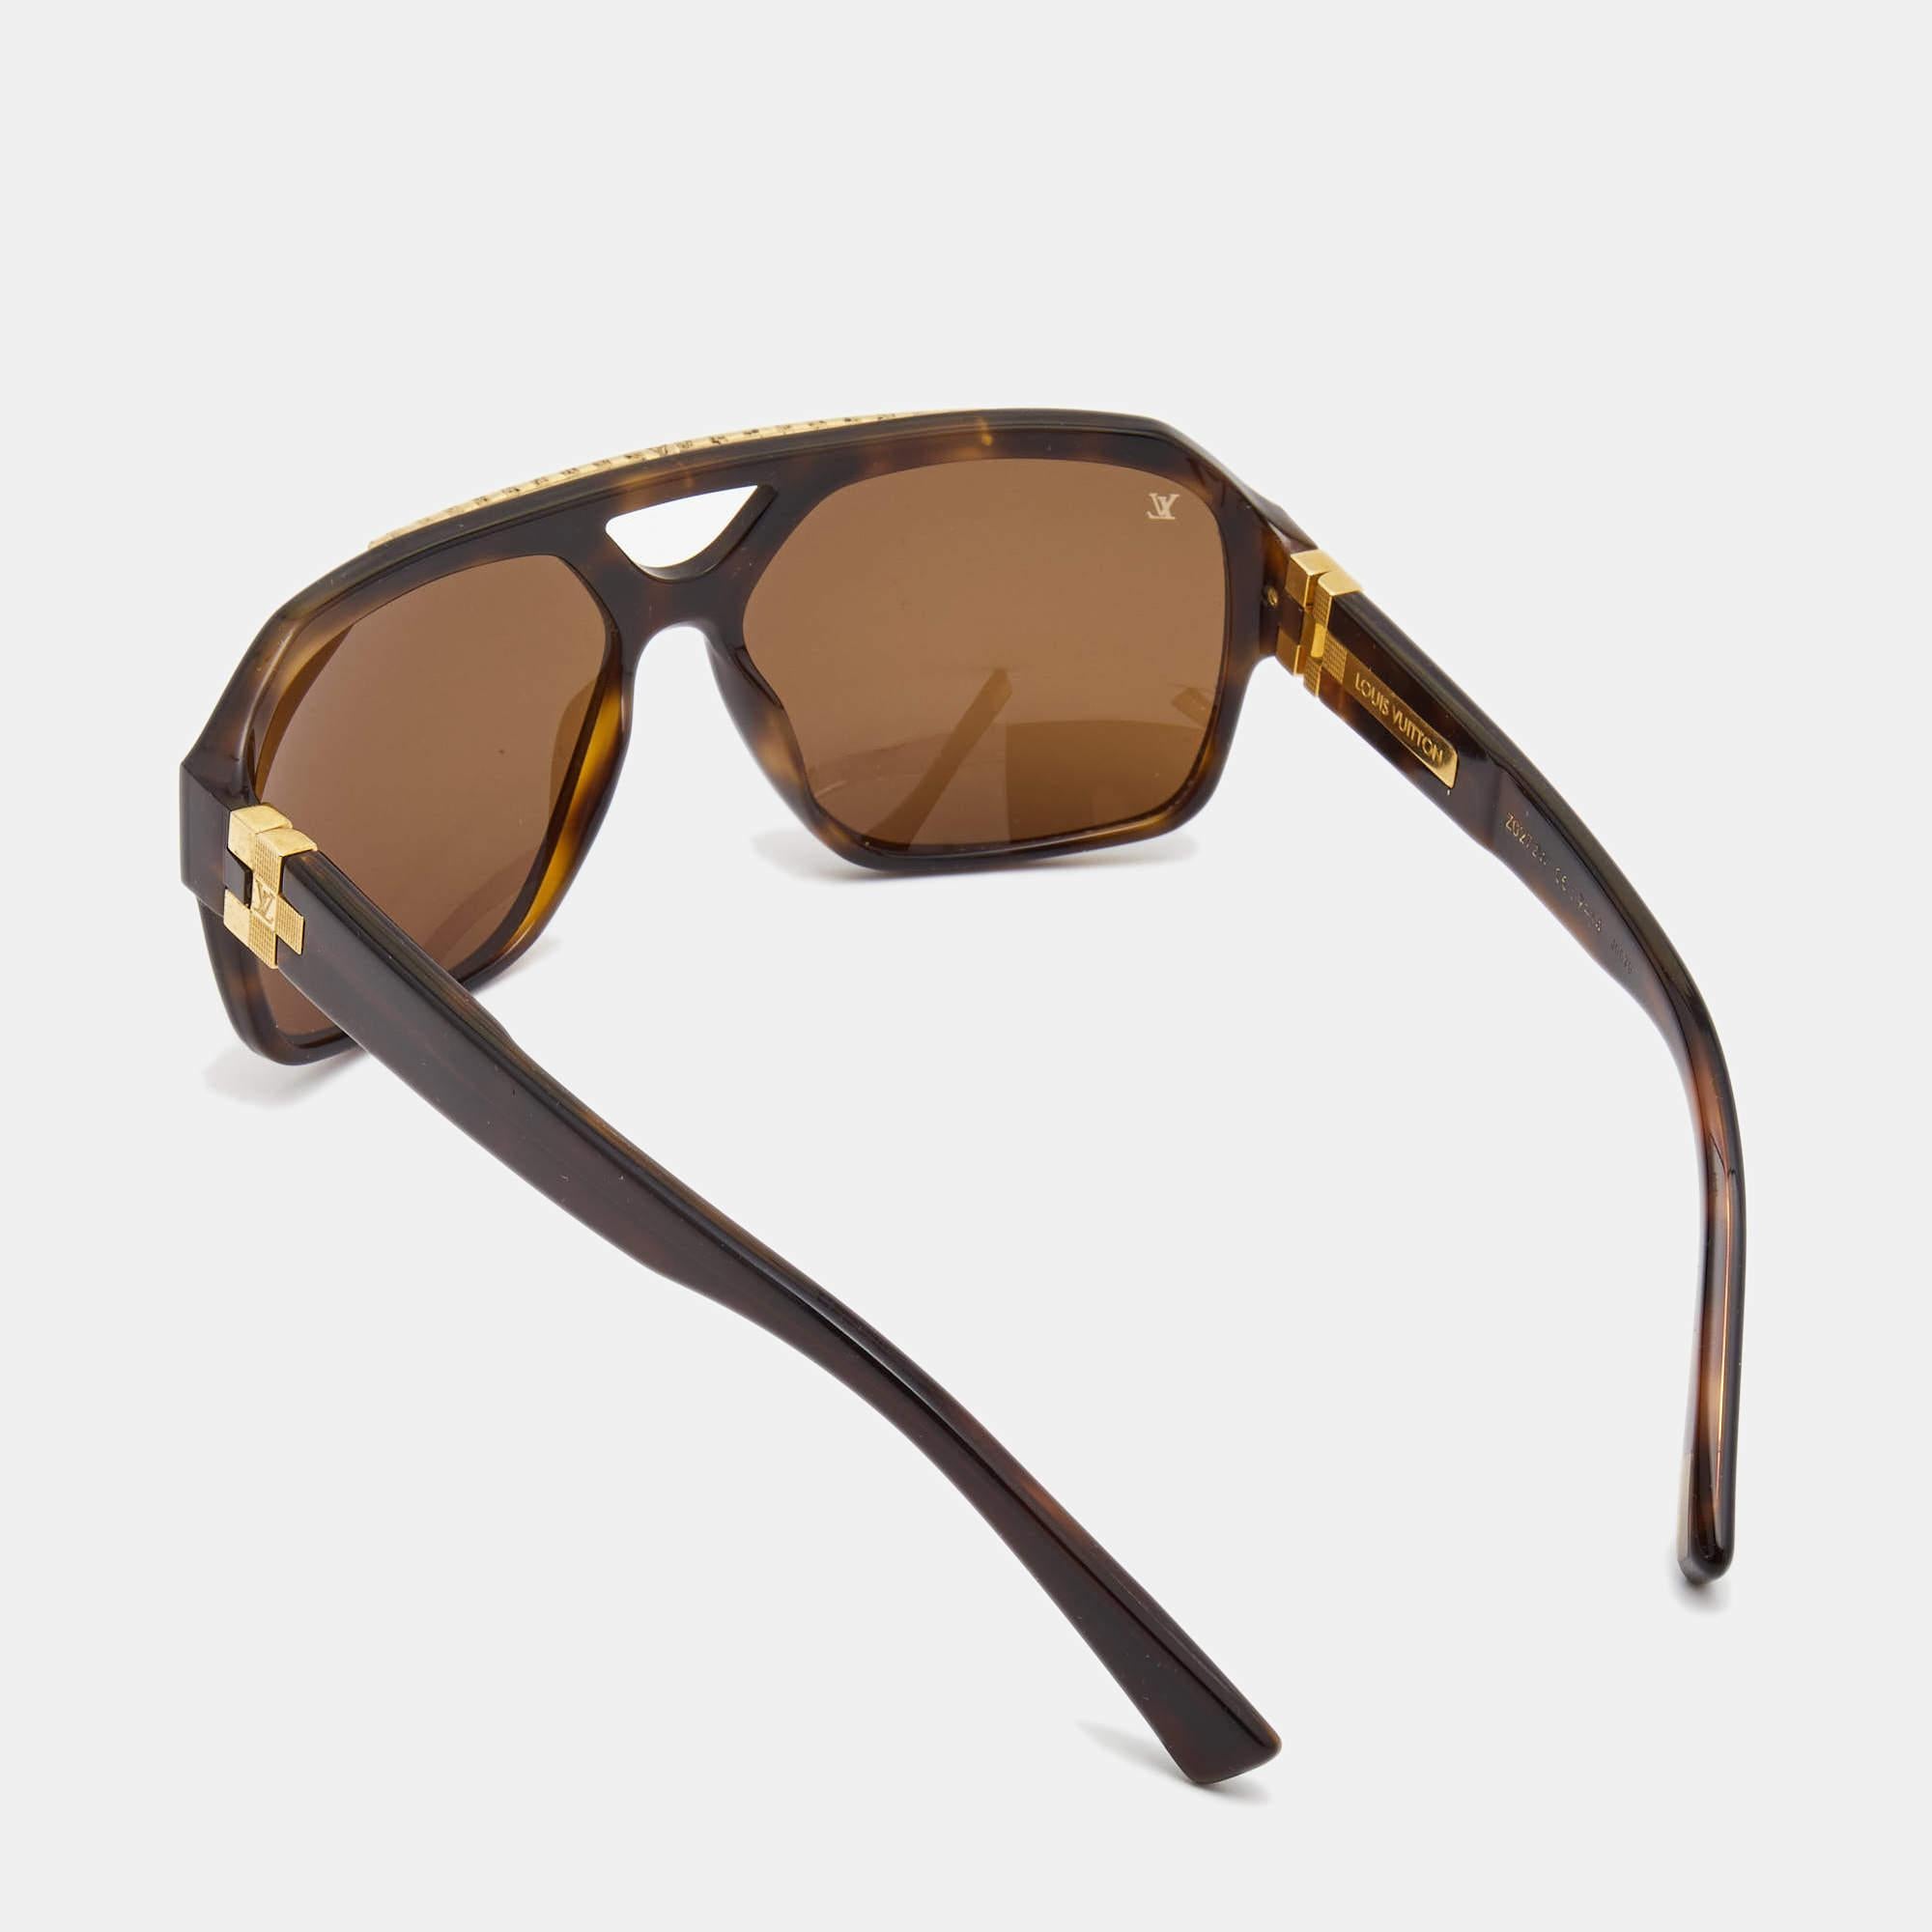 Embrace sunny days in full style with help from this pair of sunglasses. Created with expertise, the luxe sunglasses feature a well-designed frame and high-grade lenses that are equipped to protect your eyes.

Includes: Original Pouch, Original